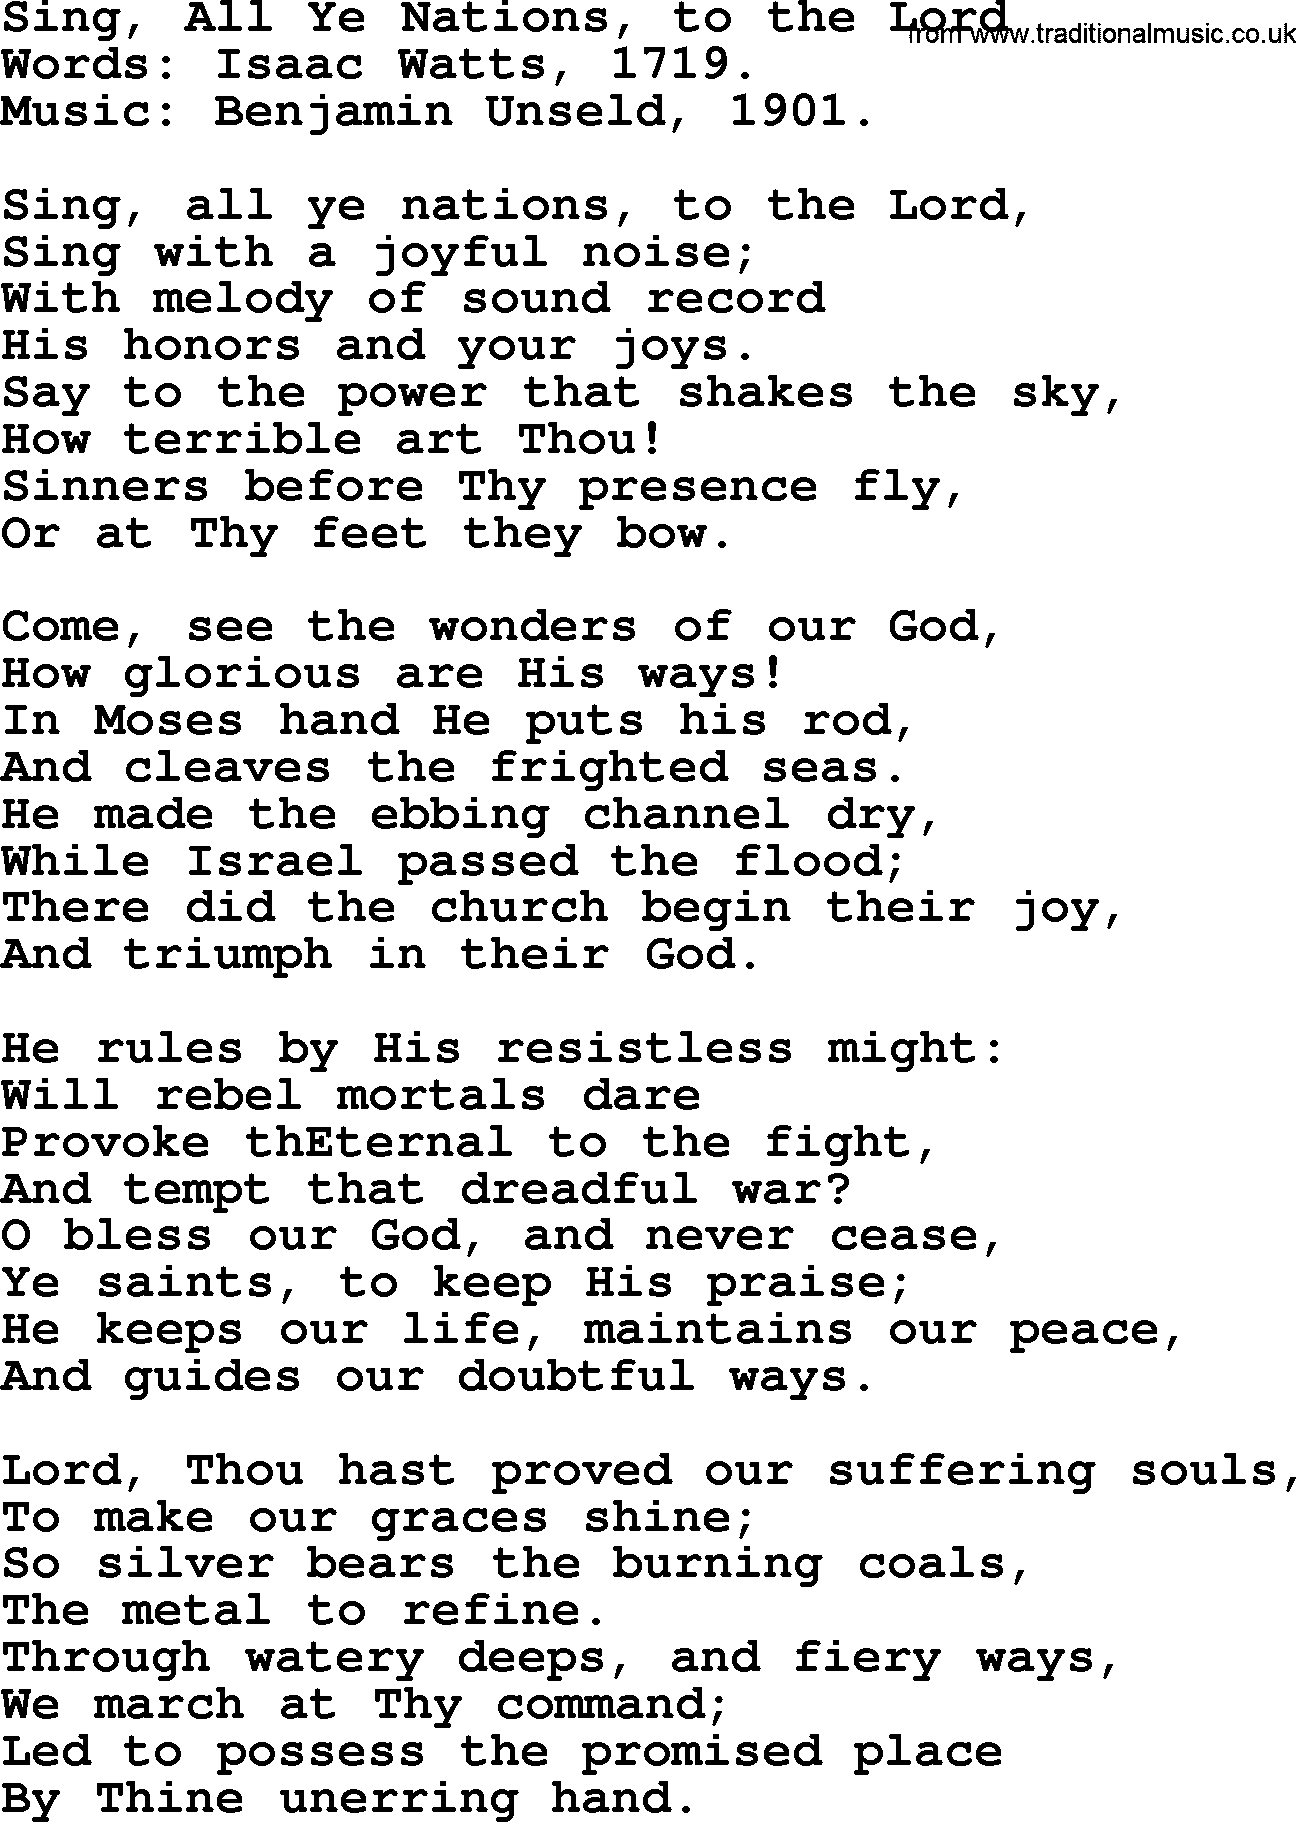 Isaac Watts Christian hymn: Sing, All Ye Nations, to the Lord- lyricss